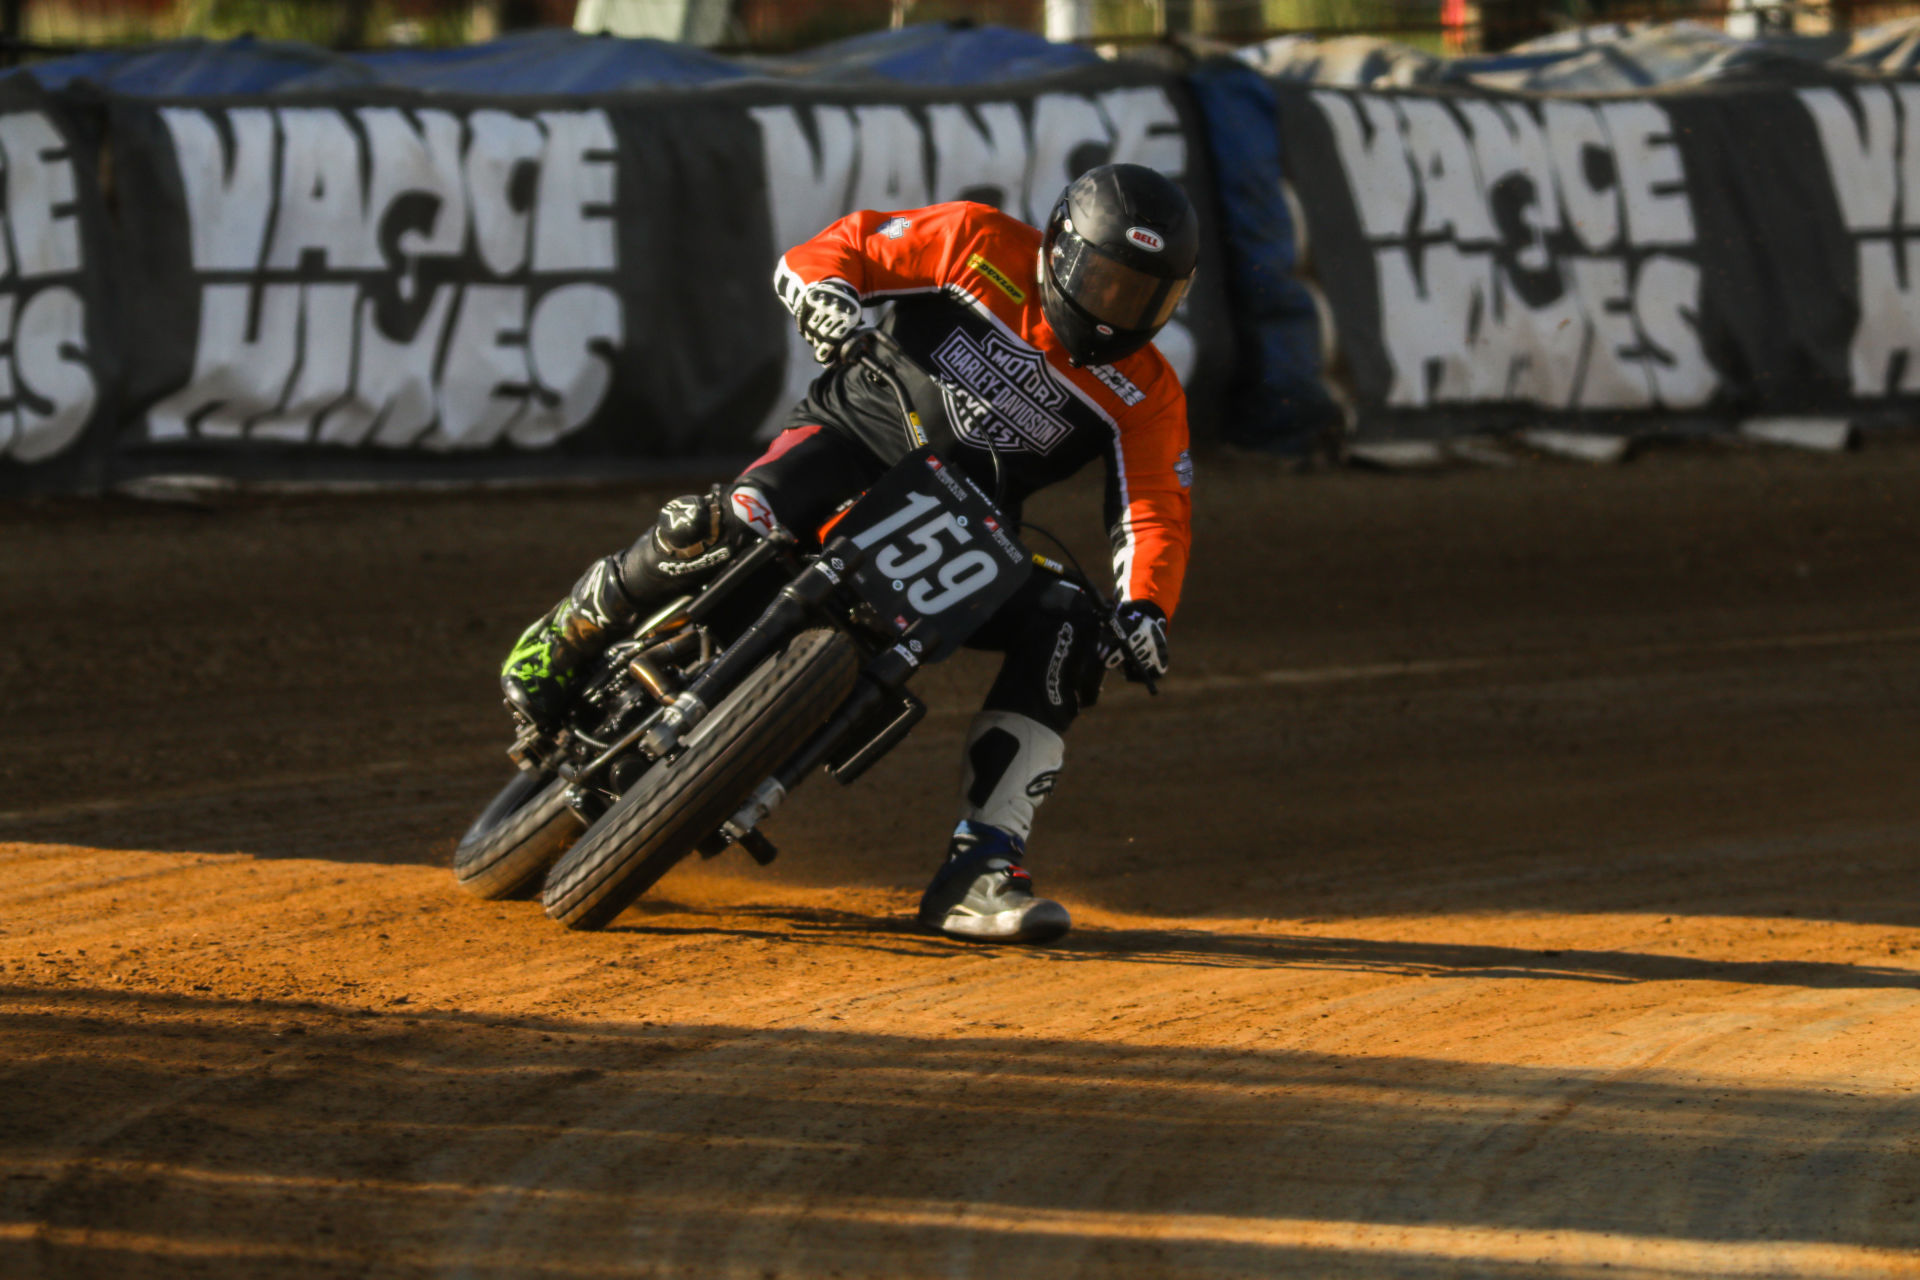 Hayden Gillim (159) on a Vance & Hines Harley-Davidson at the Springfield Mile in 2020. Photo courtesy AFT.